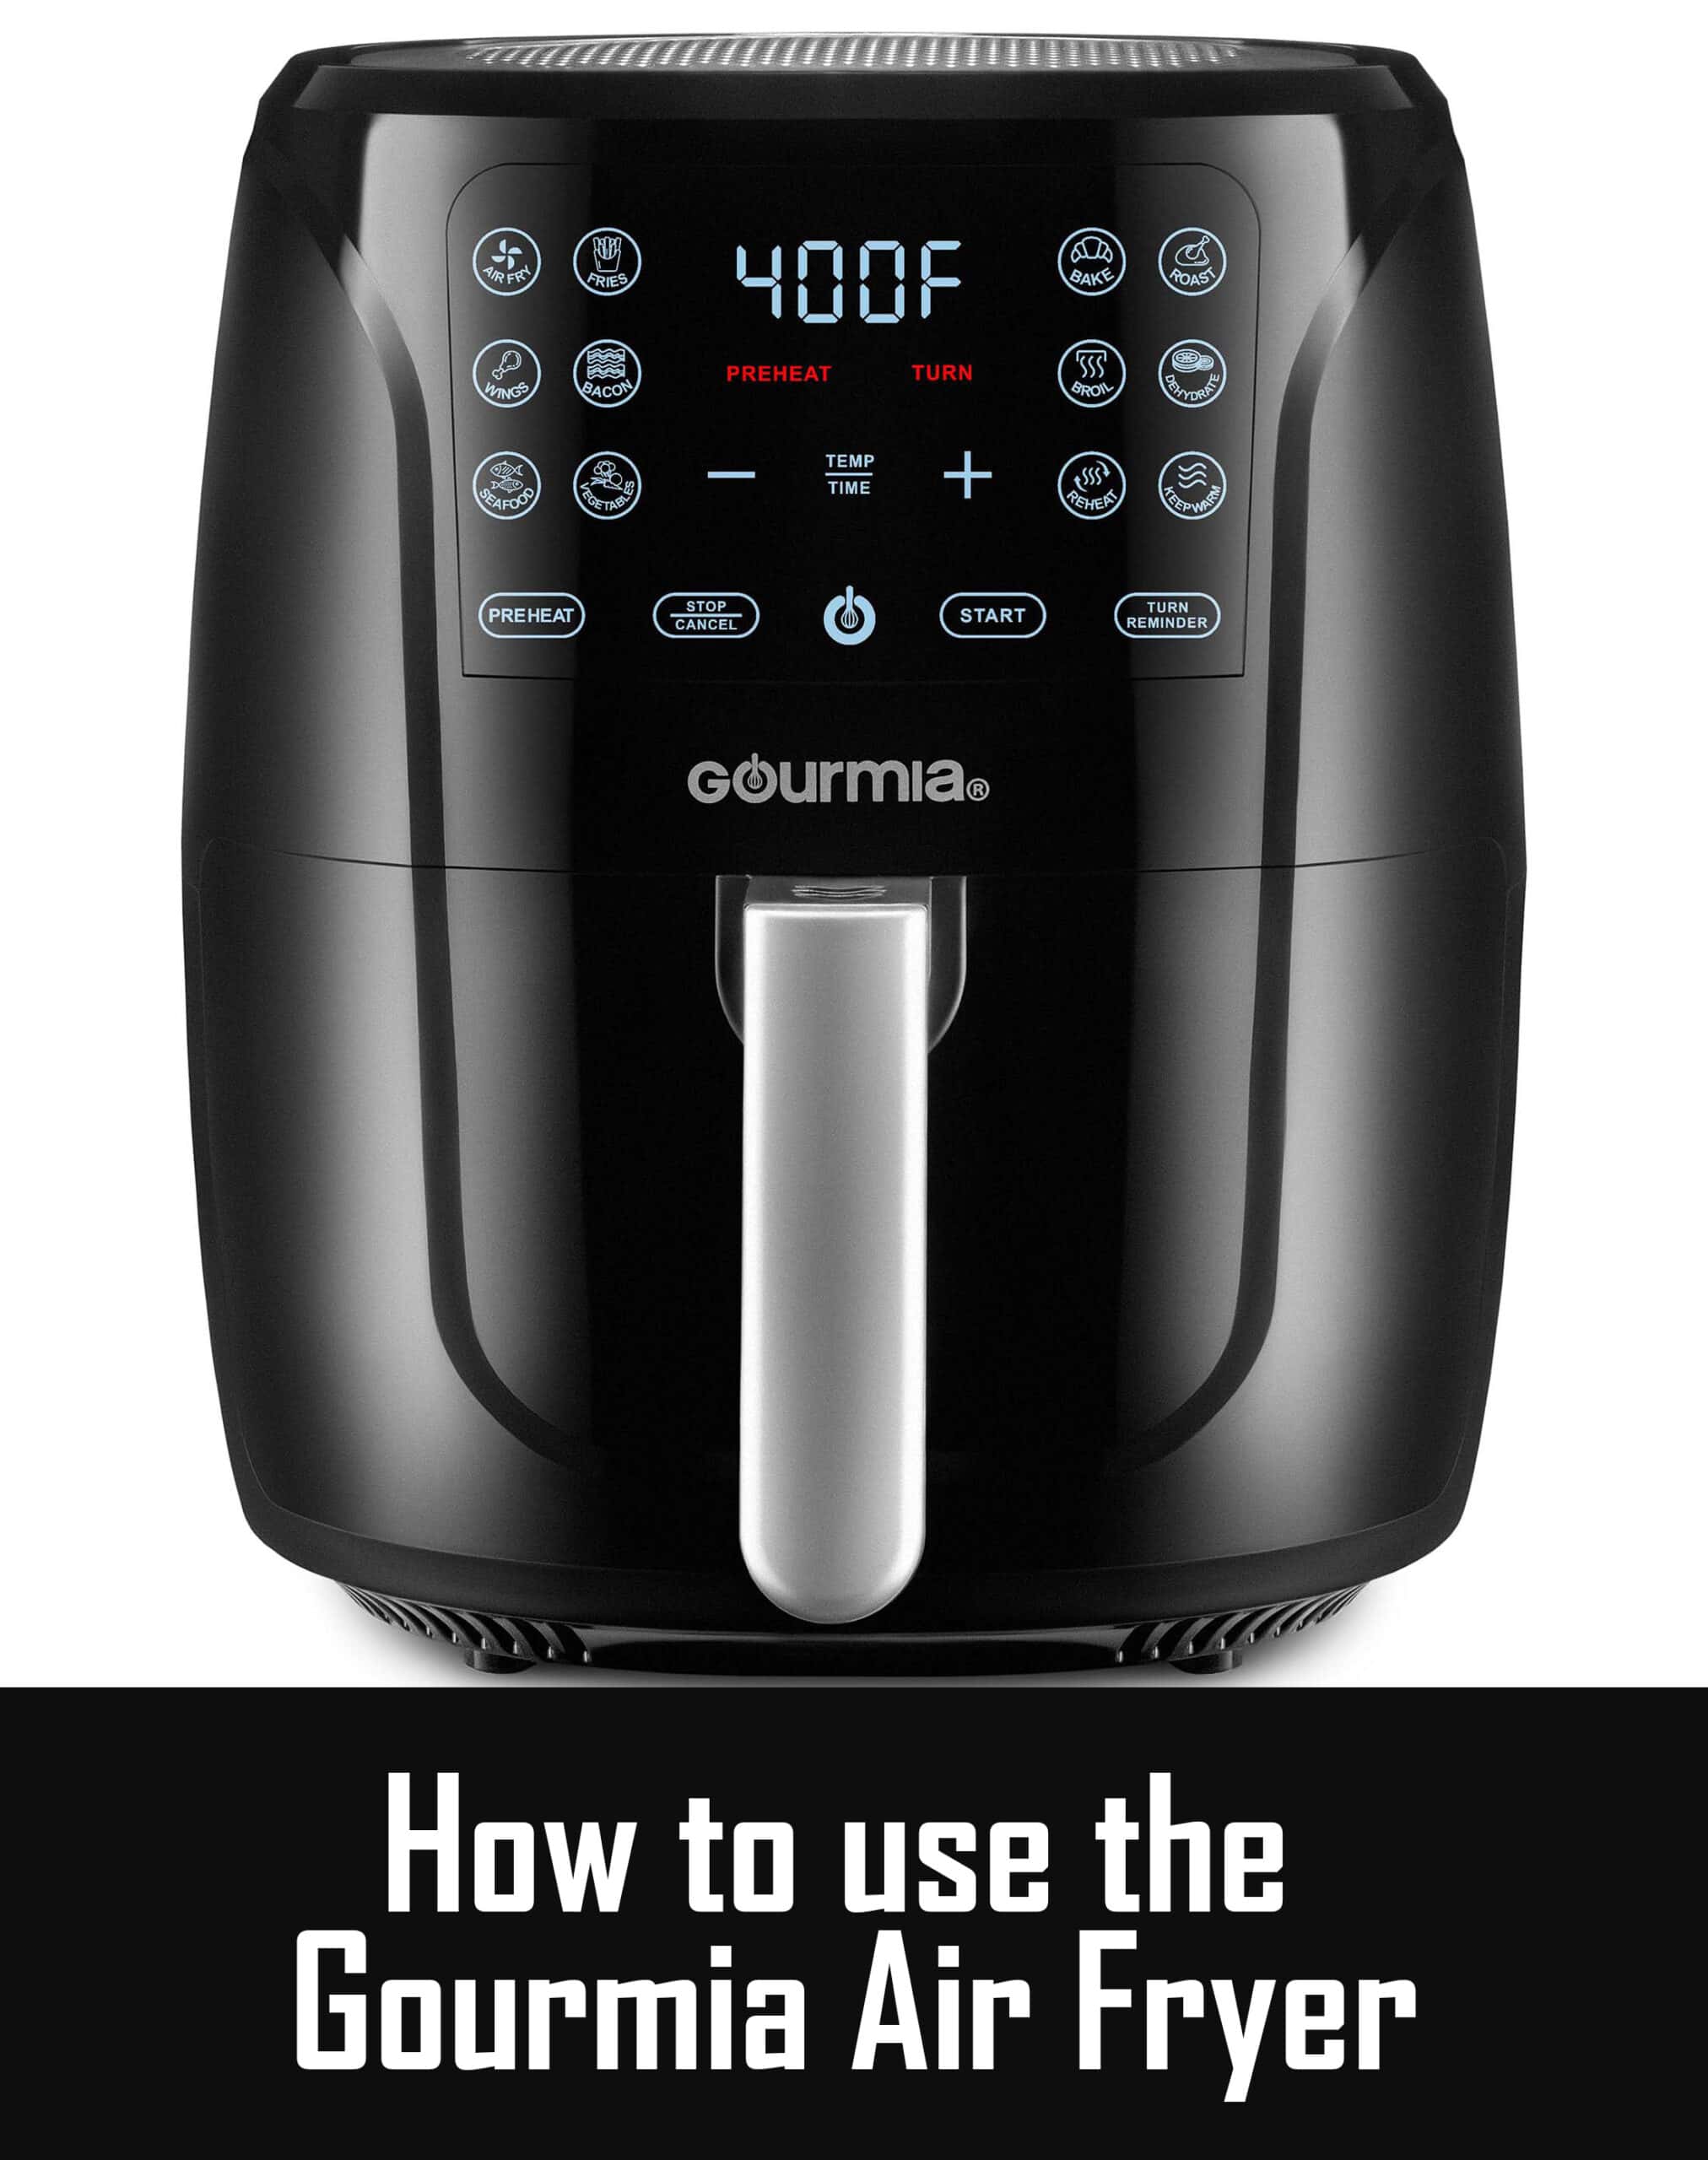 How to use the Gourmia Air Fryer